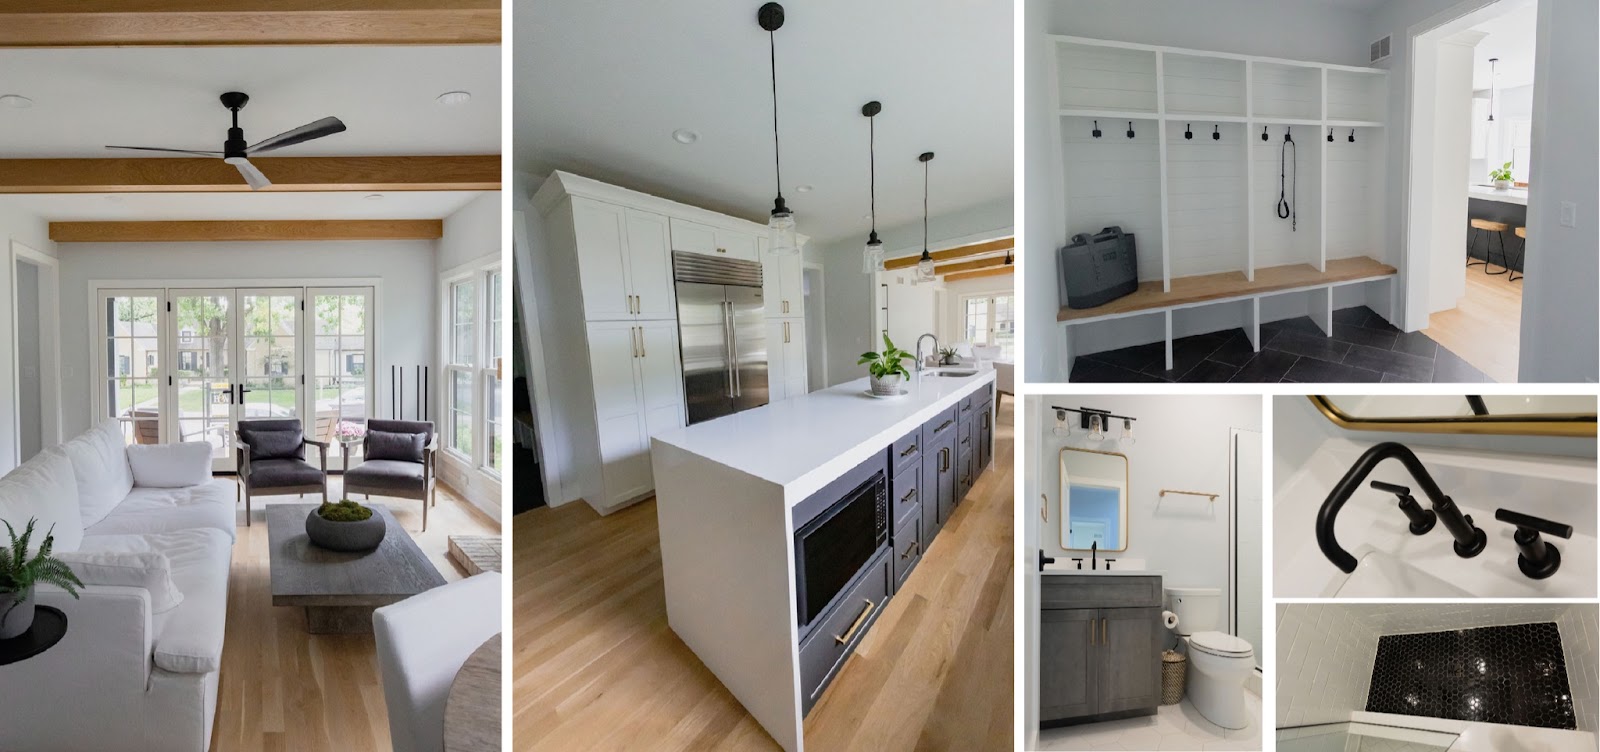 Open Floor plan kitchen & living space with matte, while oak flooring, wood and metal accents. White kitchen with a contrasting island featuring waterfall countertops. A mudroom and 3/4 hall bath with black and brass accents.